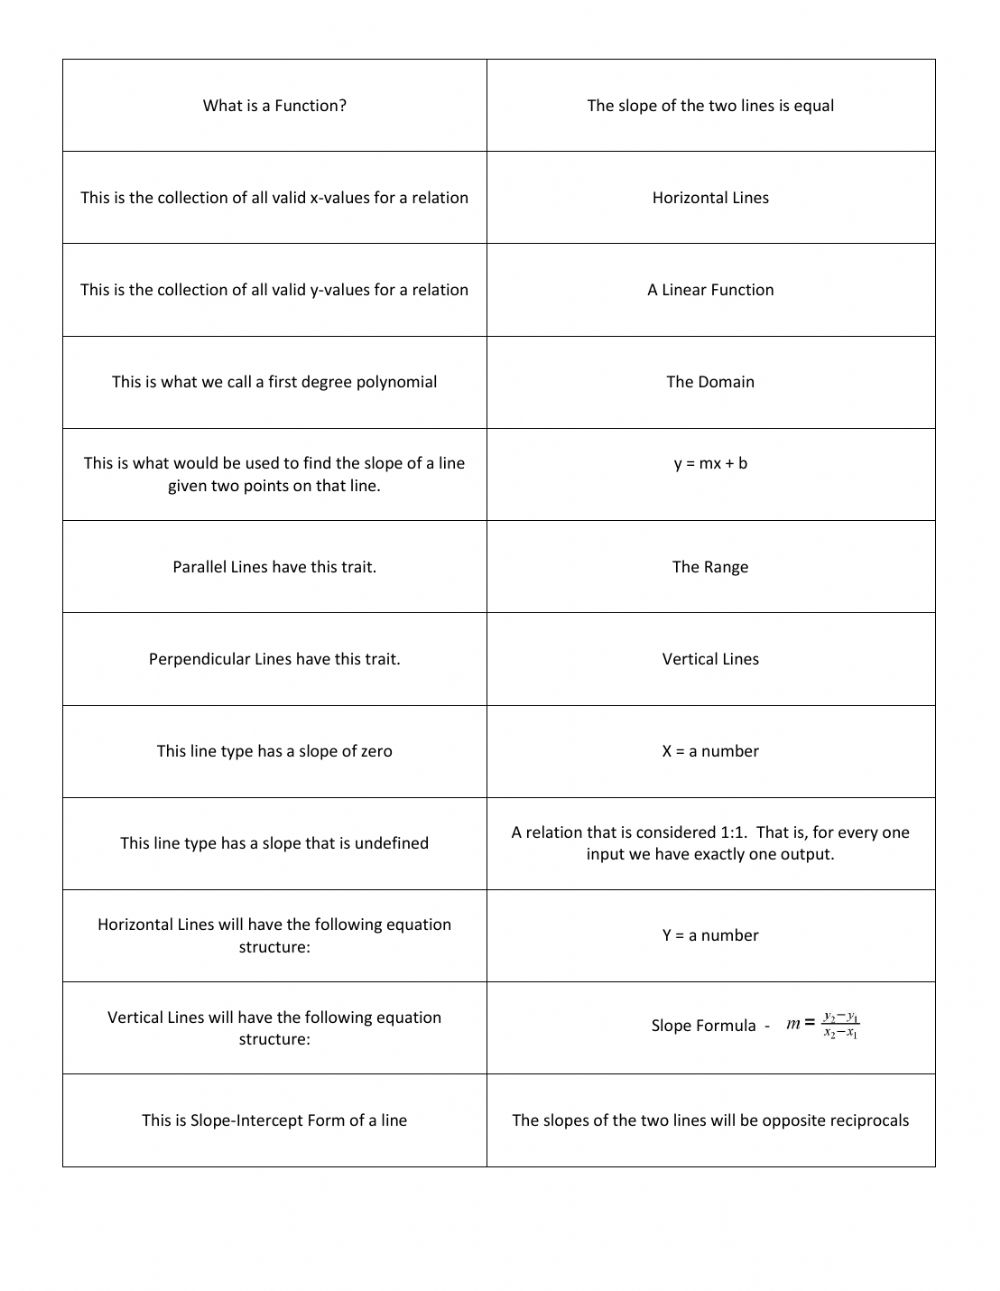 find-your-match-linear-equation-vocabulary-worksheet-math-worksheet-answers